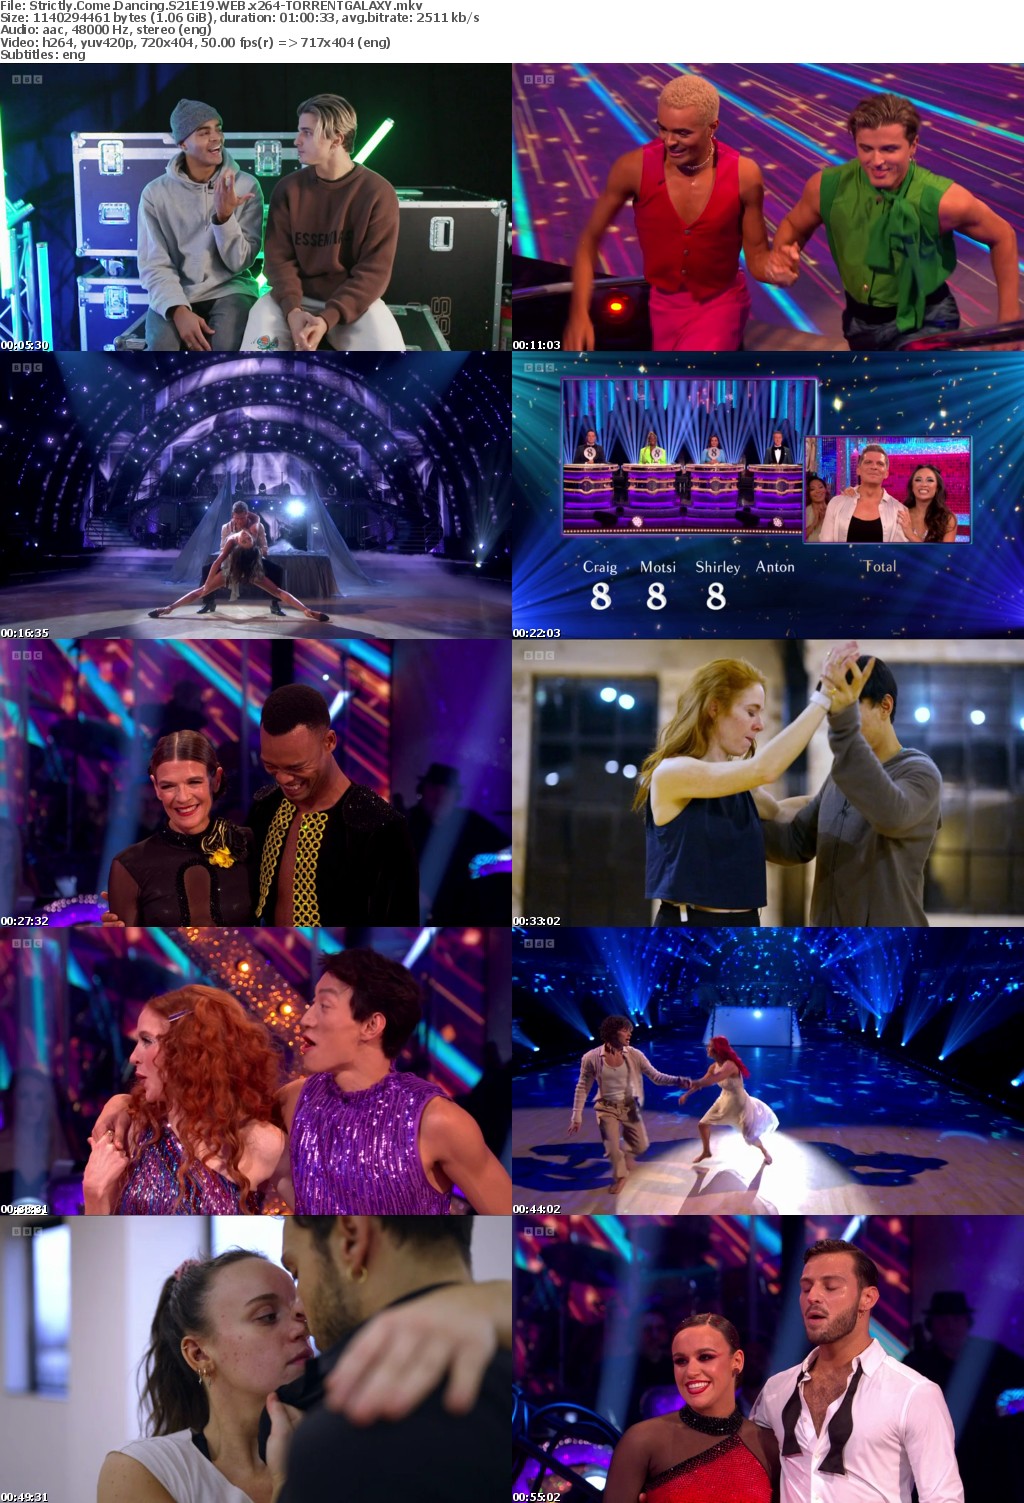 Strictly Come Dancing S21E19 WEB x264-GALAXY